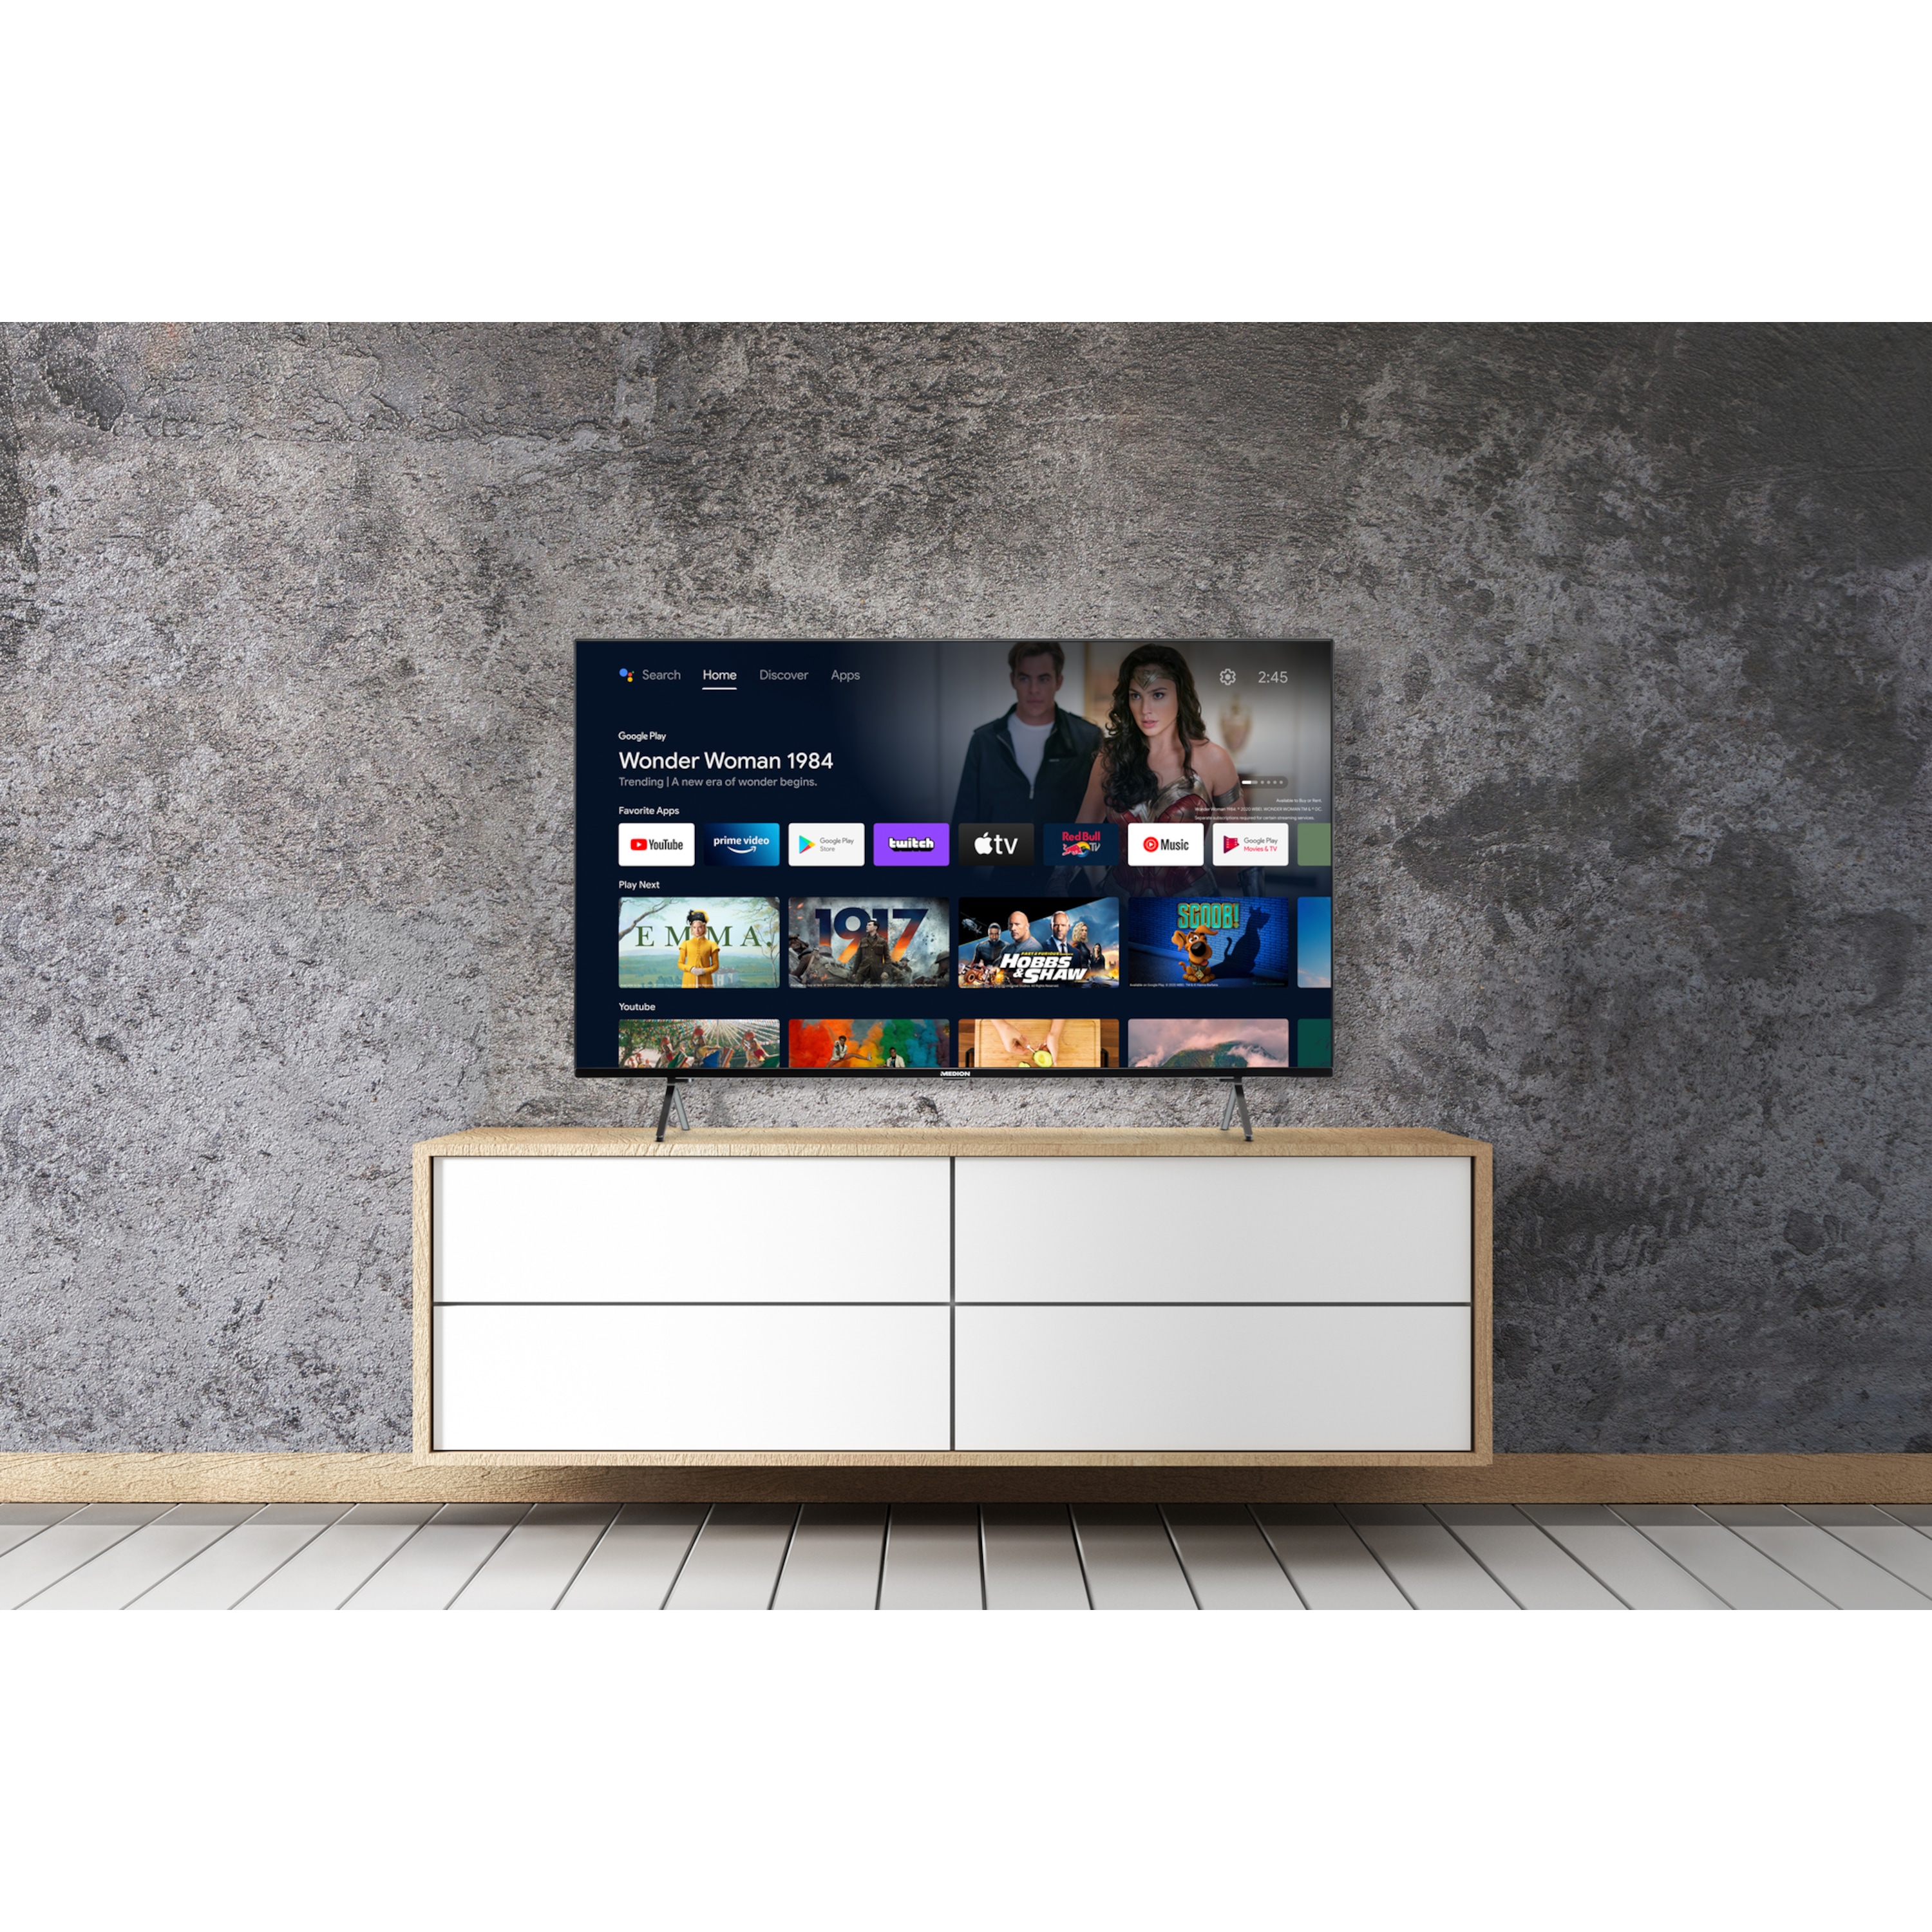 MEDION® LIFE® X14327 QLED Android TV, 108 cm (43'') Ultra HD Smart-TV, HDR, Dolby Vision®, Micro Dimming, PVR ready, Netflix, Amazon Prime Video, Bluetooth®, DTS Sound, HD Triple Tuner, CI+